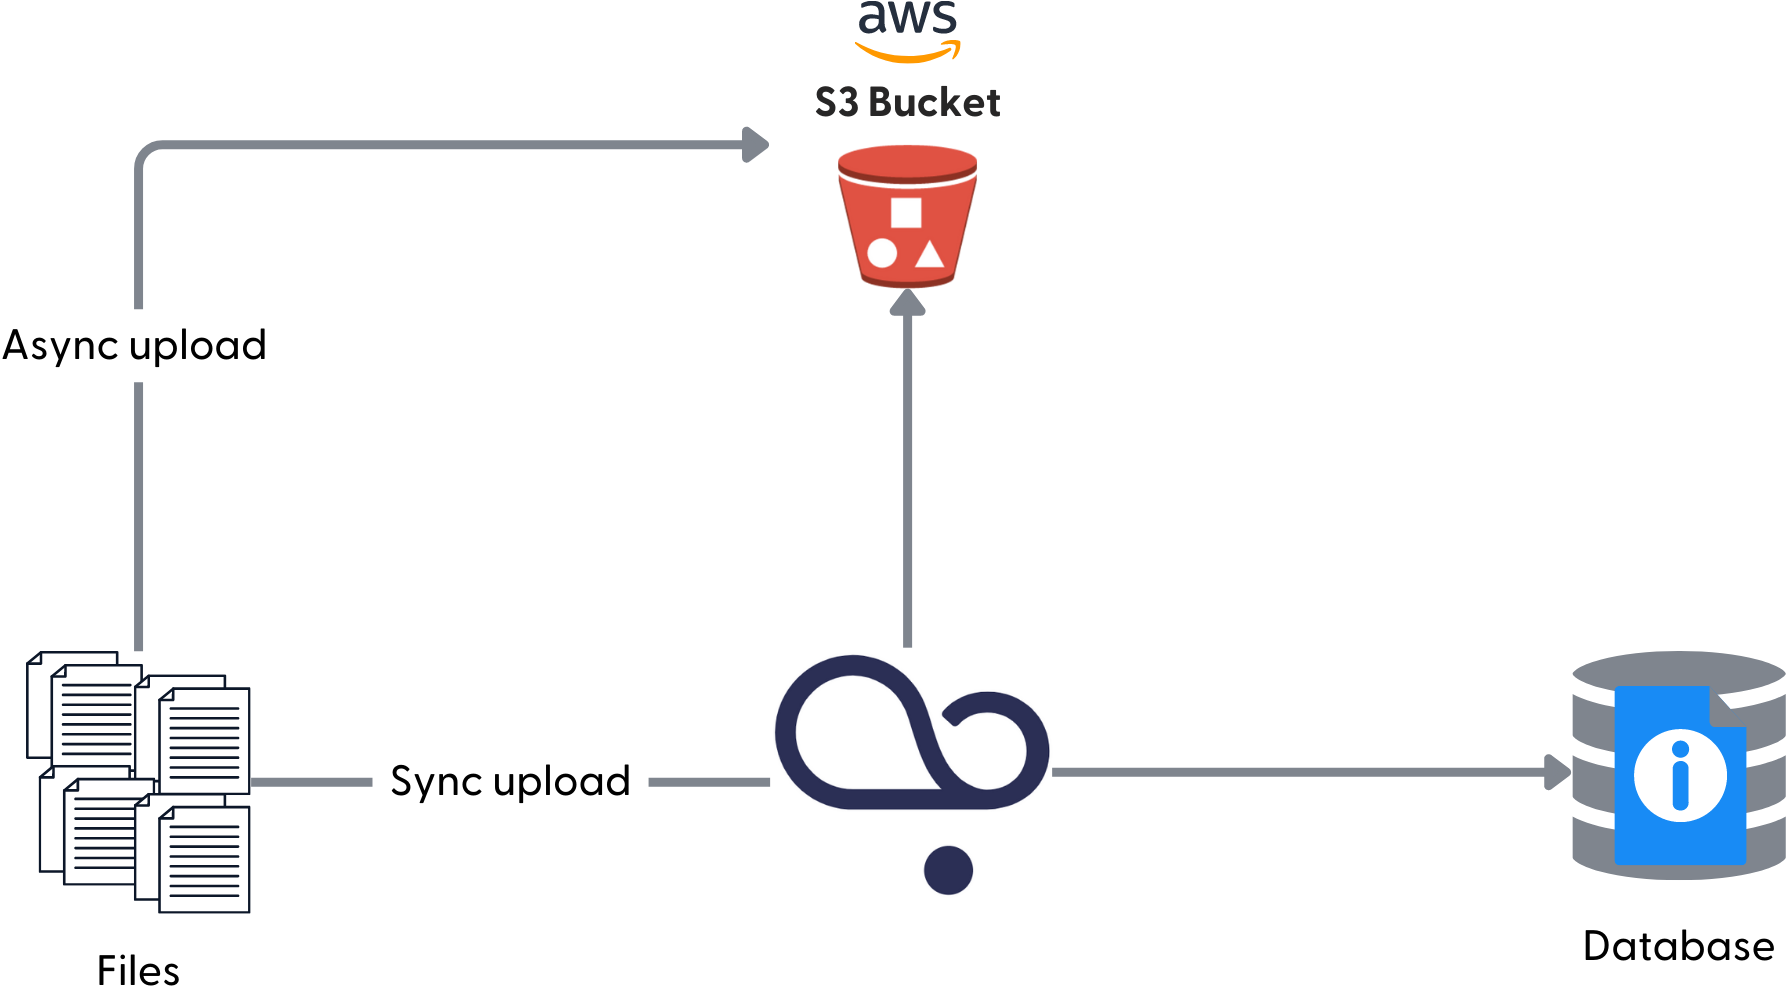 A representation of files with an arrow going through deepset cloud to an AWS s3 bucket and described as synchronous upload. Then another arrow going from the files representation straight to the AWS s3 bucket for asynchronous upload. And another arrow going from the deepset Cloud logo to a database icon.